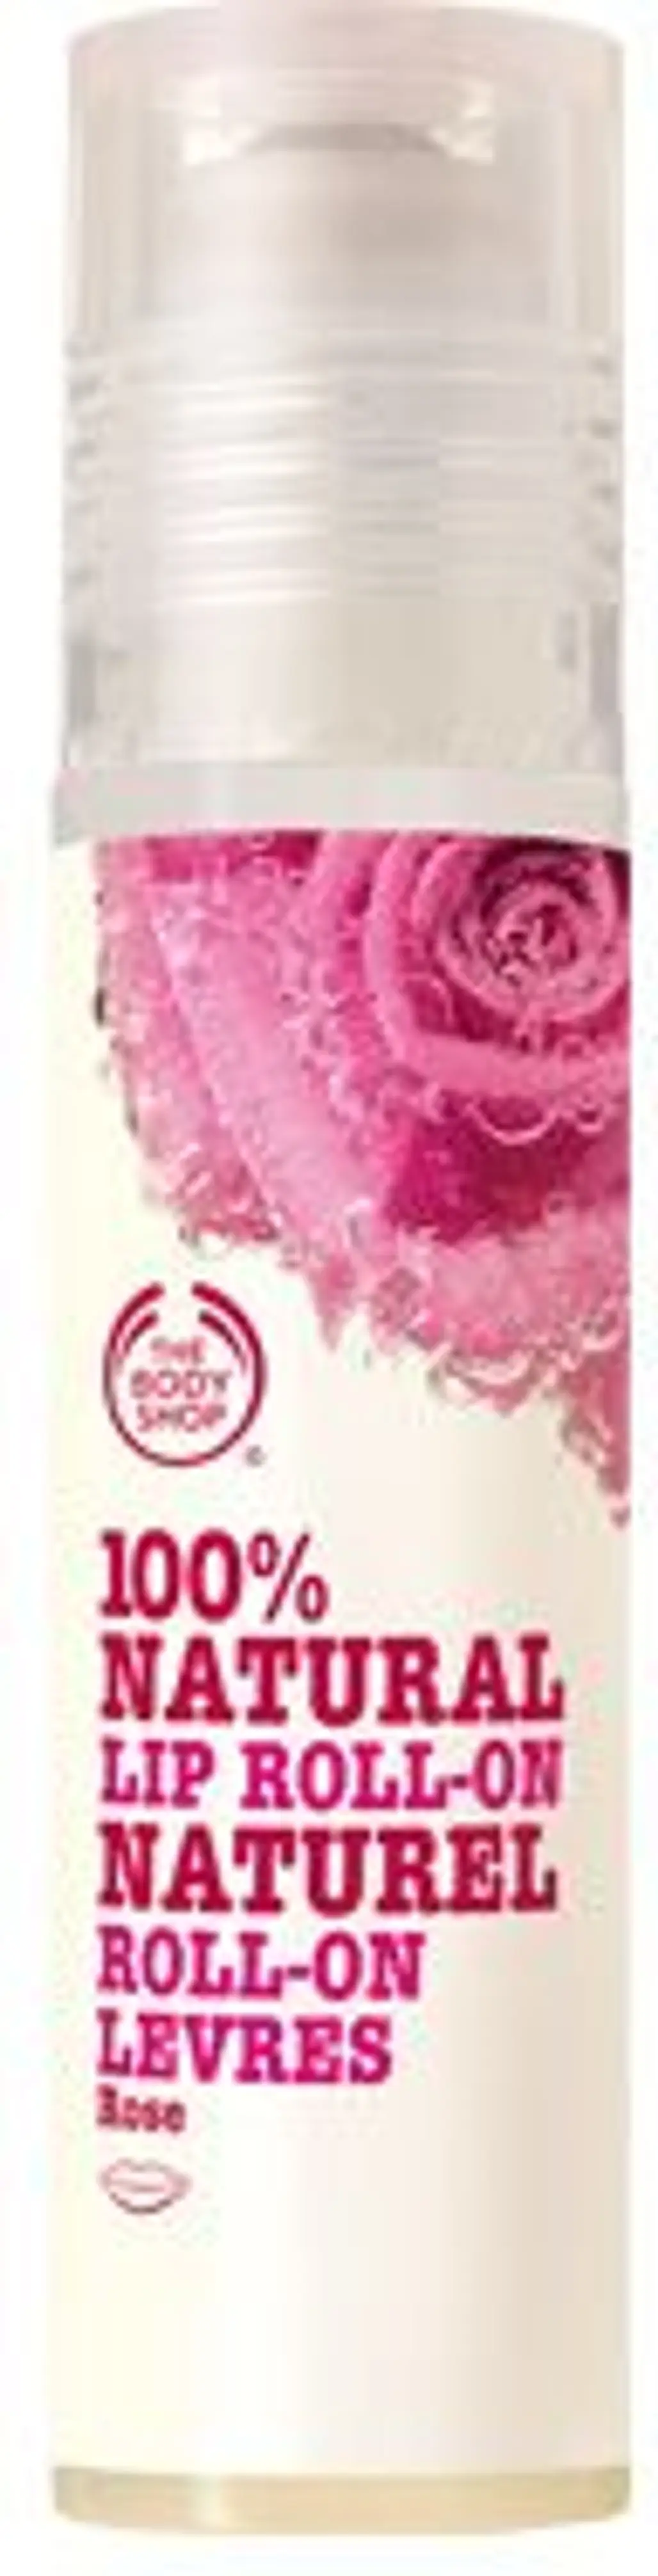 The Body Shop 100% Natural Lip Roll-on Rose